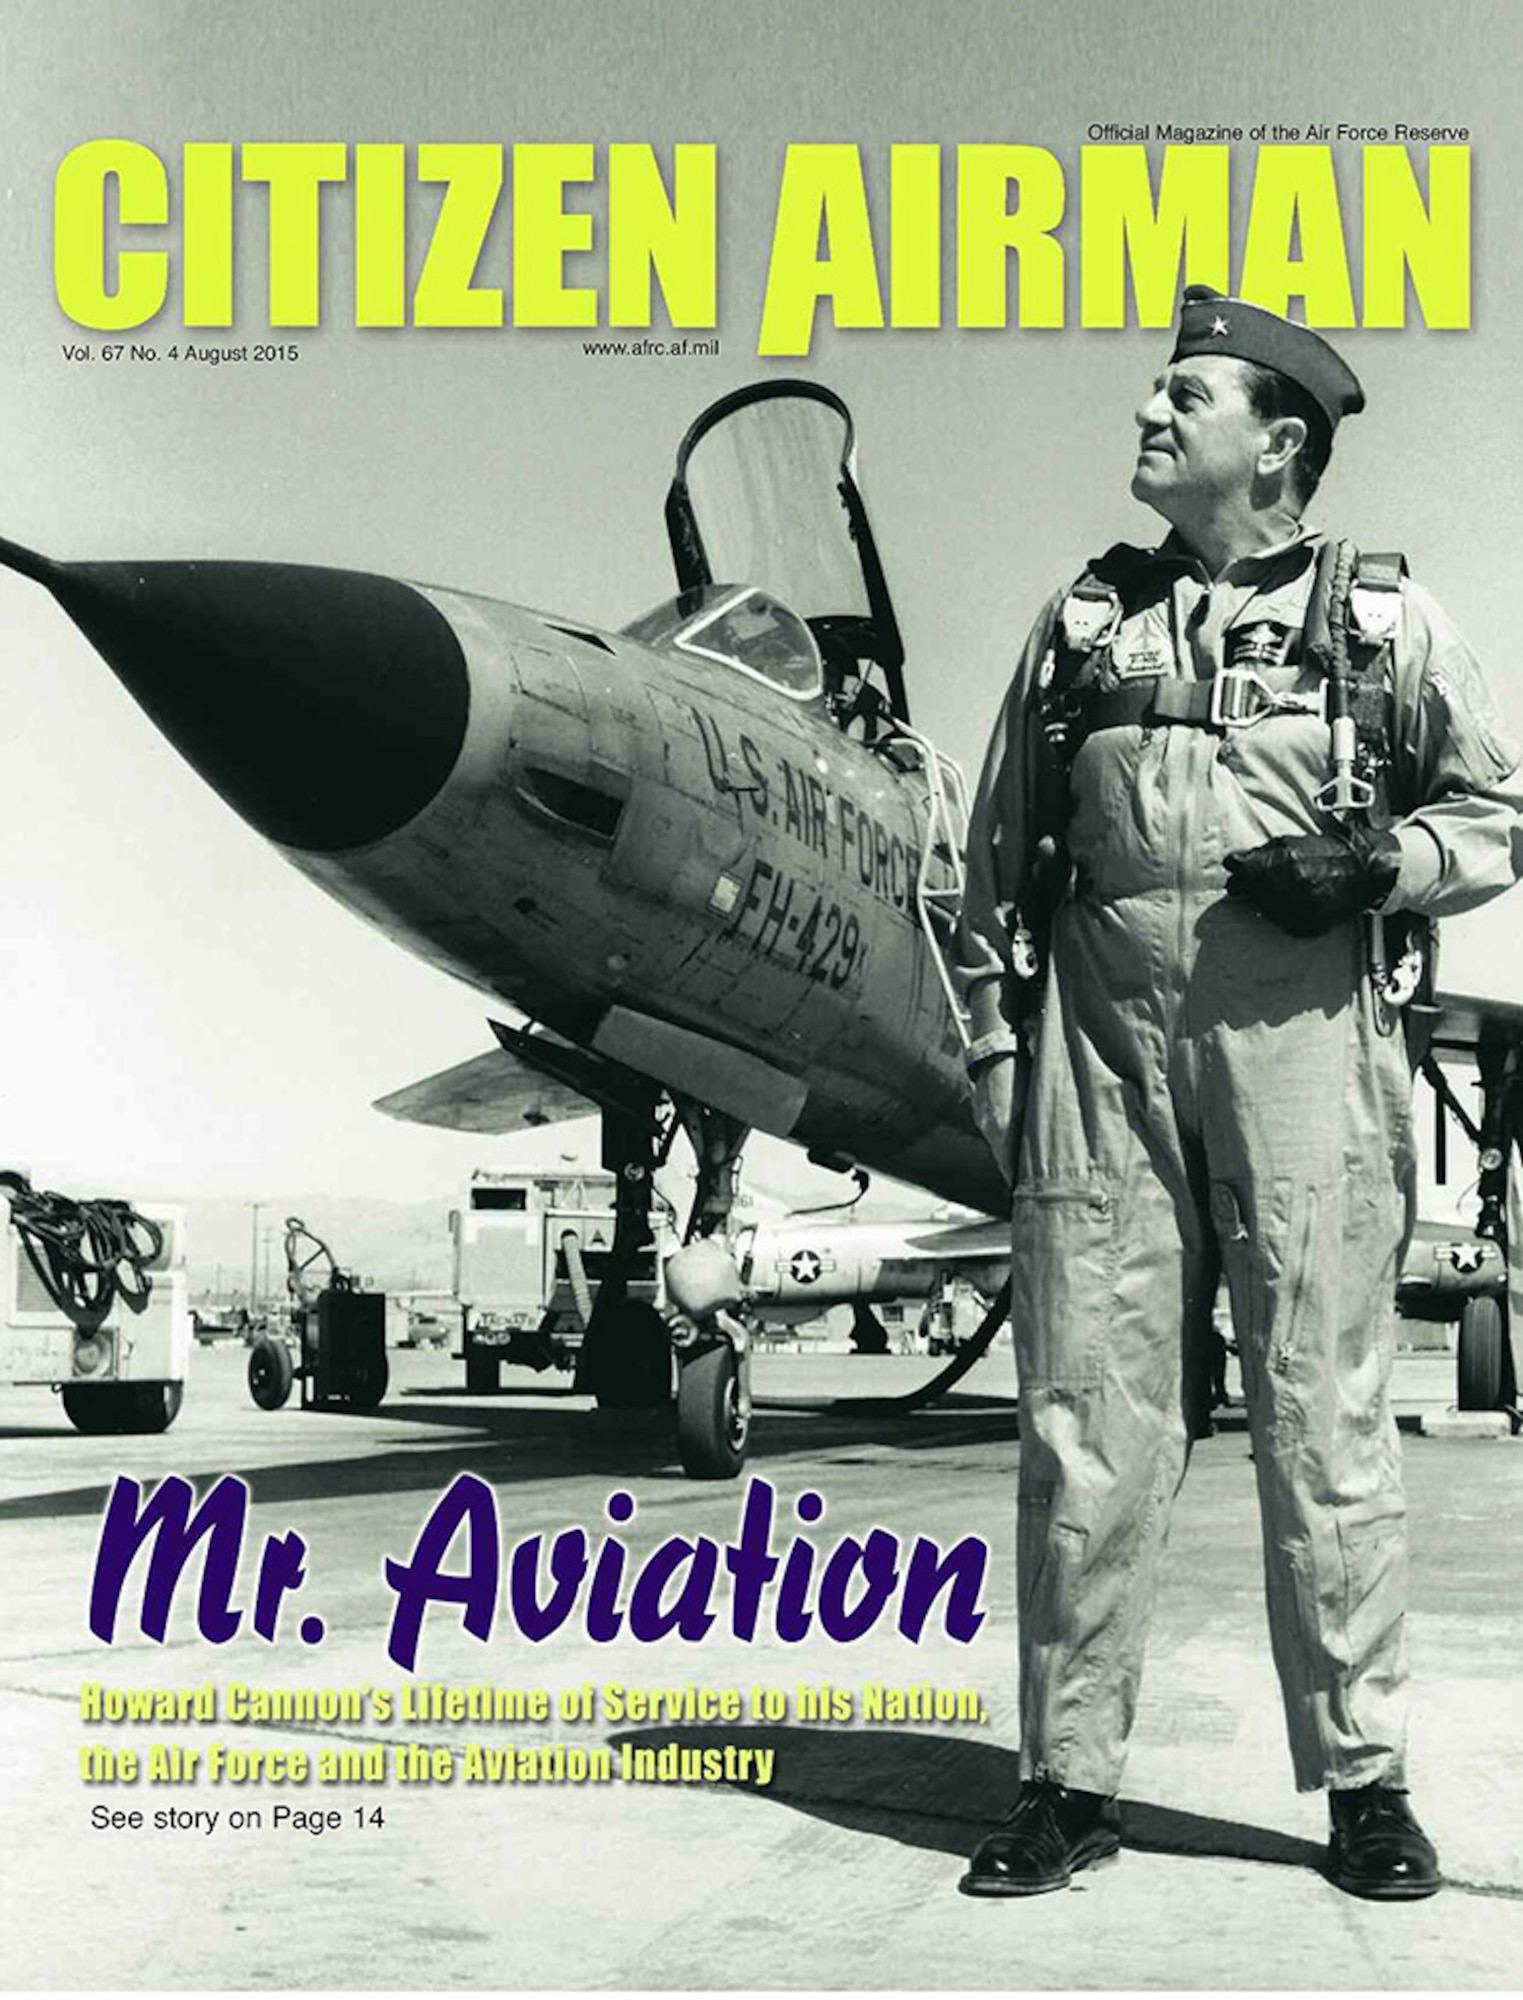 The August issue of Citizen Airman is now available on the web  at www.citamn.afrc.af.mil. 

The cover story is a Profiles in Leadership piece on Howard Cannon. Cannon survived a plane crash in World War II as a member of the Army Air Corps, attained the rank of major general in the Air Force Reserve and served as a member of the U.S. Senate.

The August issue also includes stories on an instructor pilot in Texas who is a single mother of three boys and decided to adopt two little girls, the 39th Flying Training Squadron and its mission of training those who will train future Air Force pilots, two brothers -- one a Reservist and the other an active-duty member -- serving together at Moody Air Force Base, Georgia, a security forces Airman who also works for the San Antonio Police Department Gang Unit, a Reservist who made the decision to go small when it comes to her living arrangements, and a Reservist who founded a nonprofit organization to provide vacations for military members.

The print version of the August issue is scheduled to be mailed out the second week of August.
